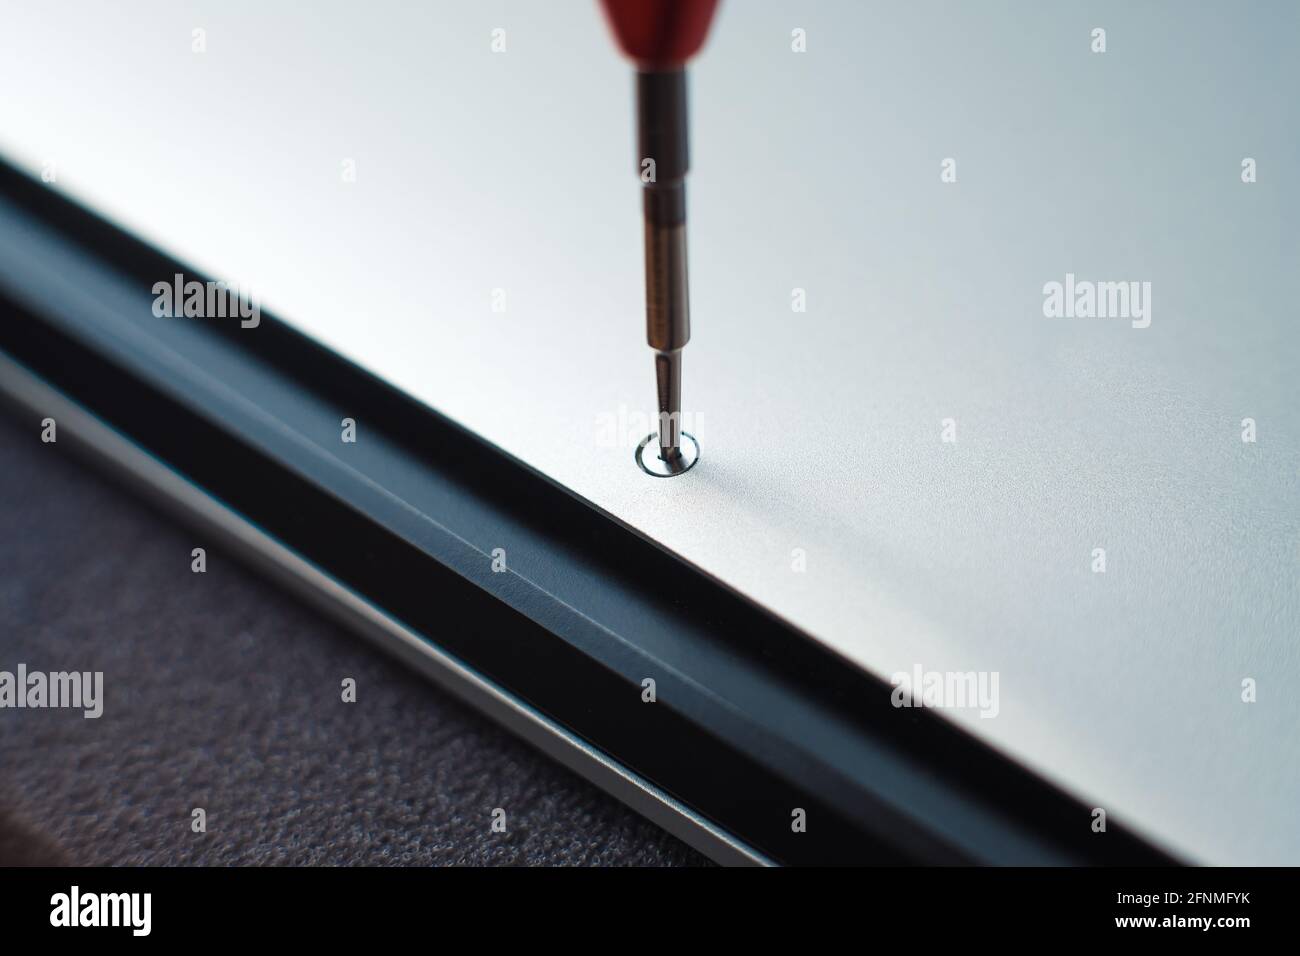 Master unscrewing small screw with magnetic screwdriver tool of broken laptop. Stock Photo